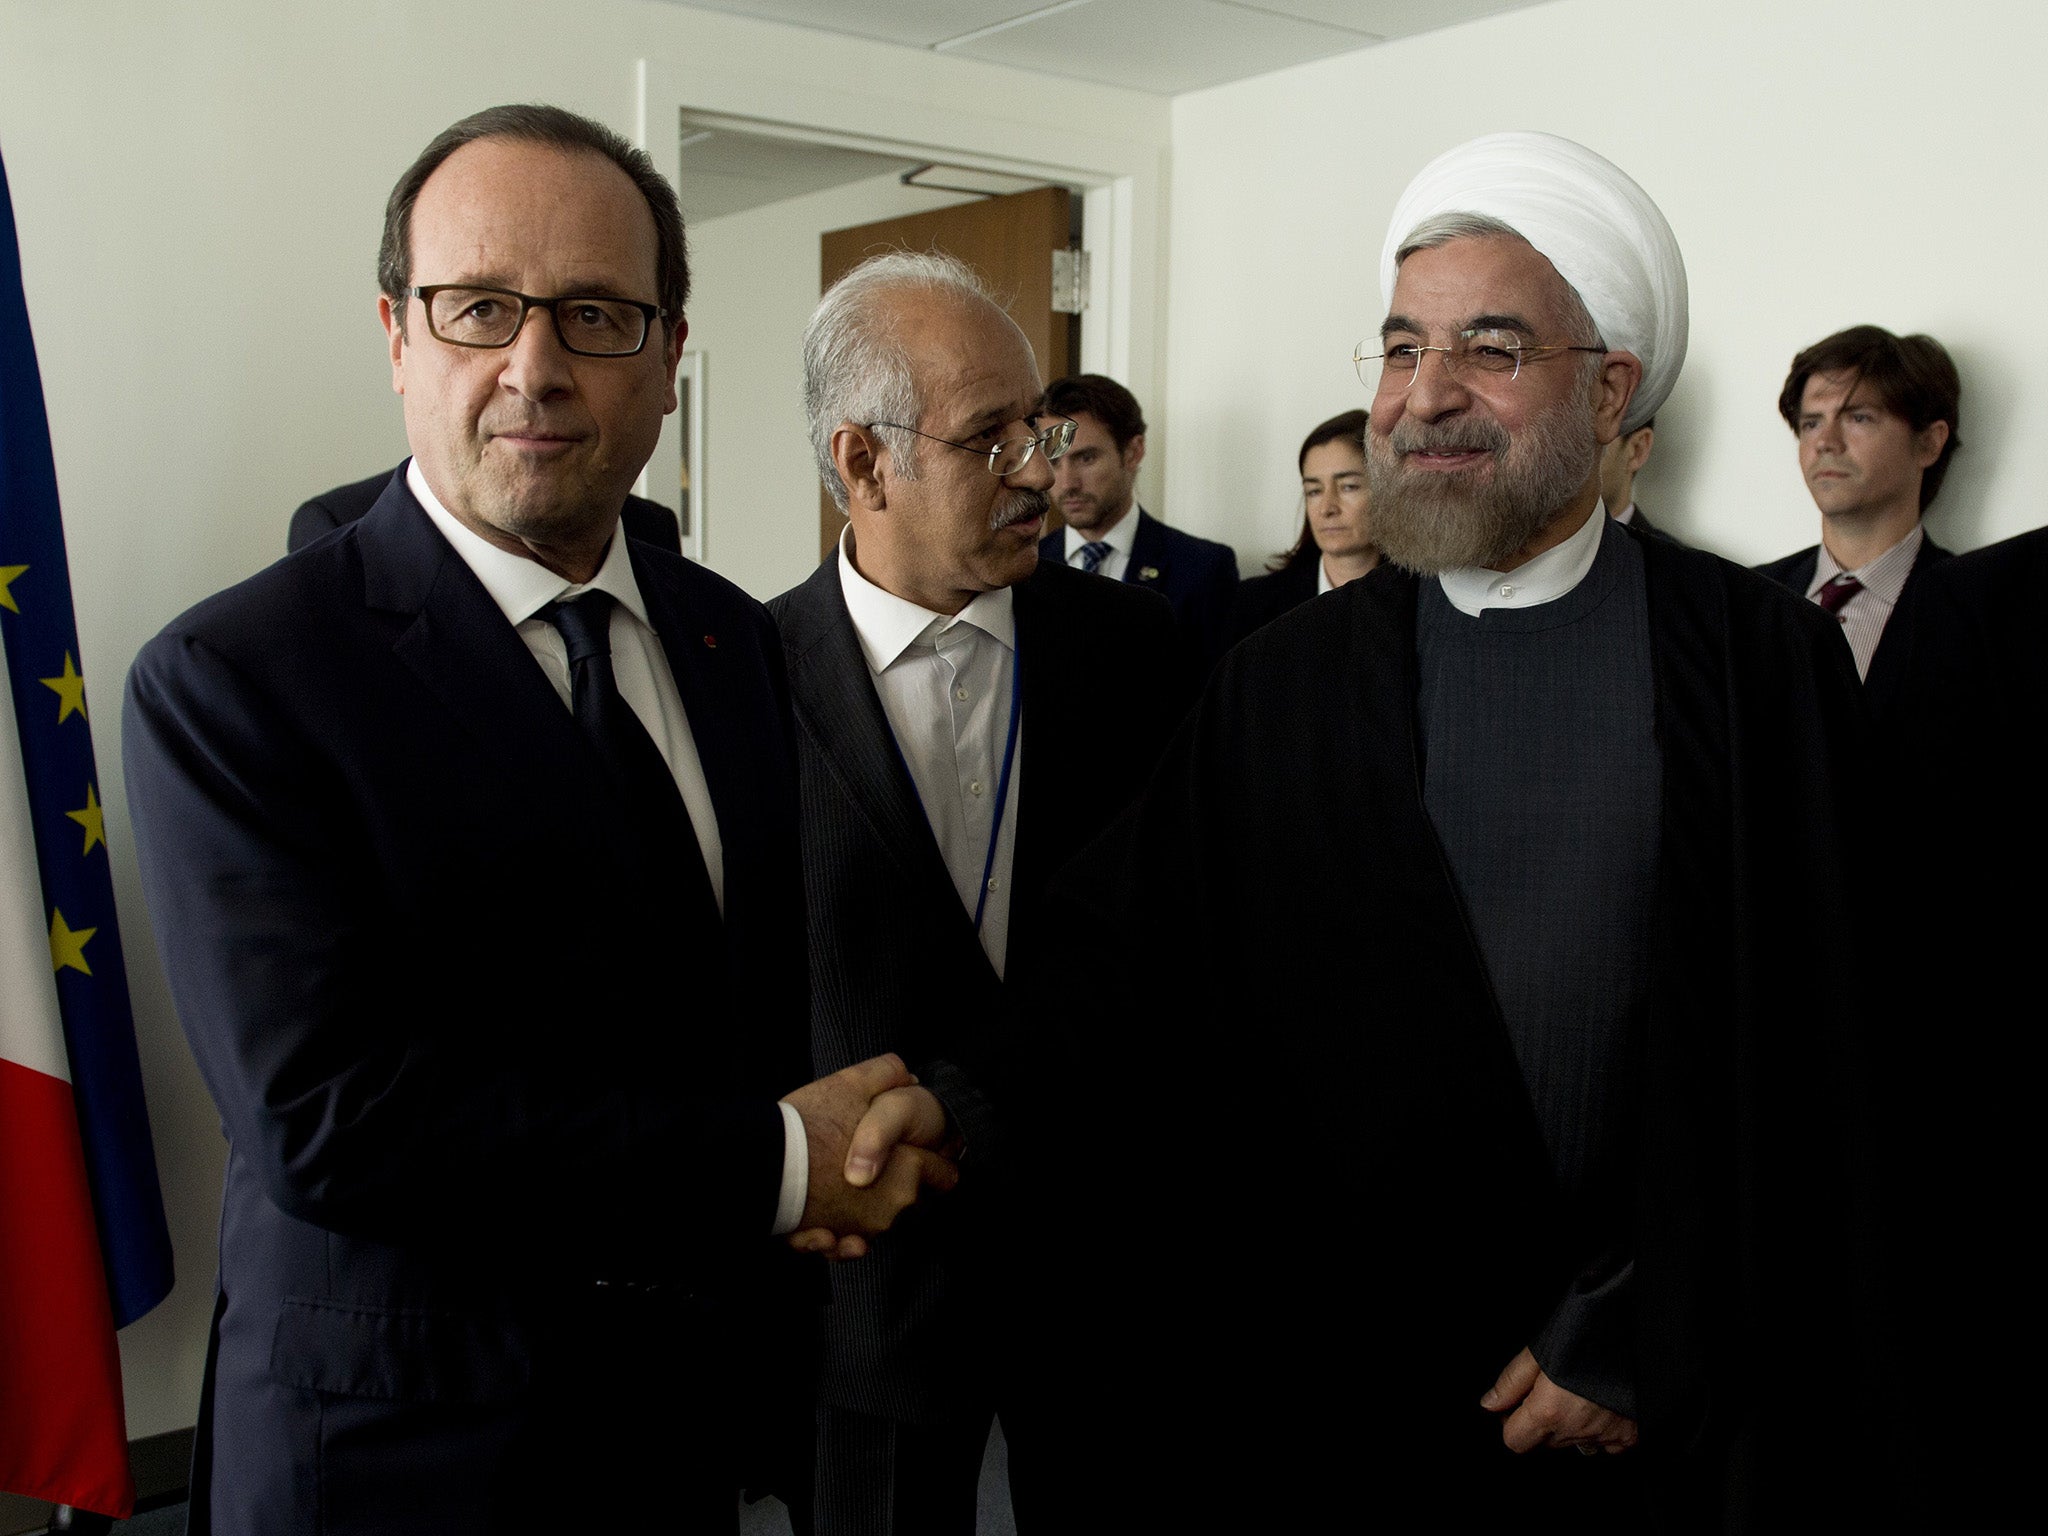 Hollande and Rouhani were supposed to meet for lunch at an upmarket restaurant in Paris